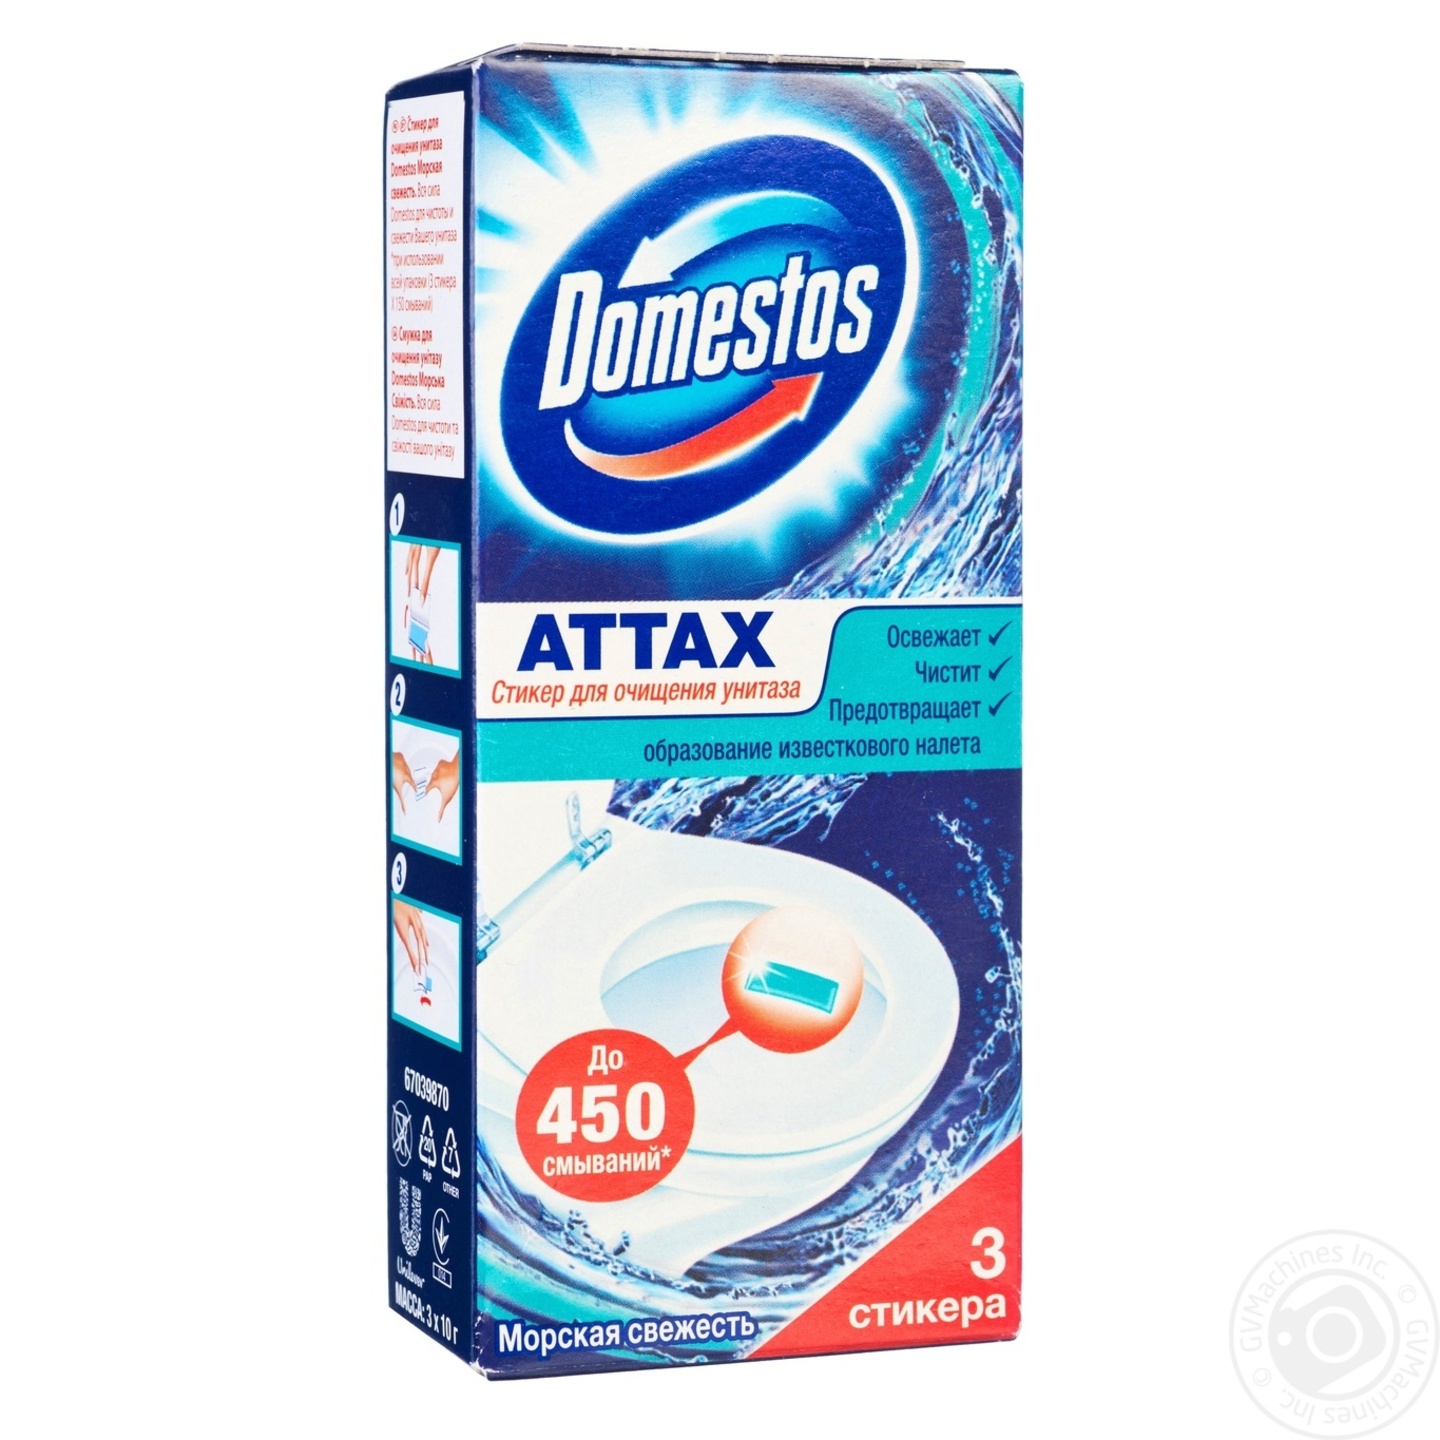 Domestos Attax Toilet Cleaning Strips